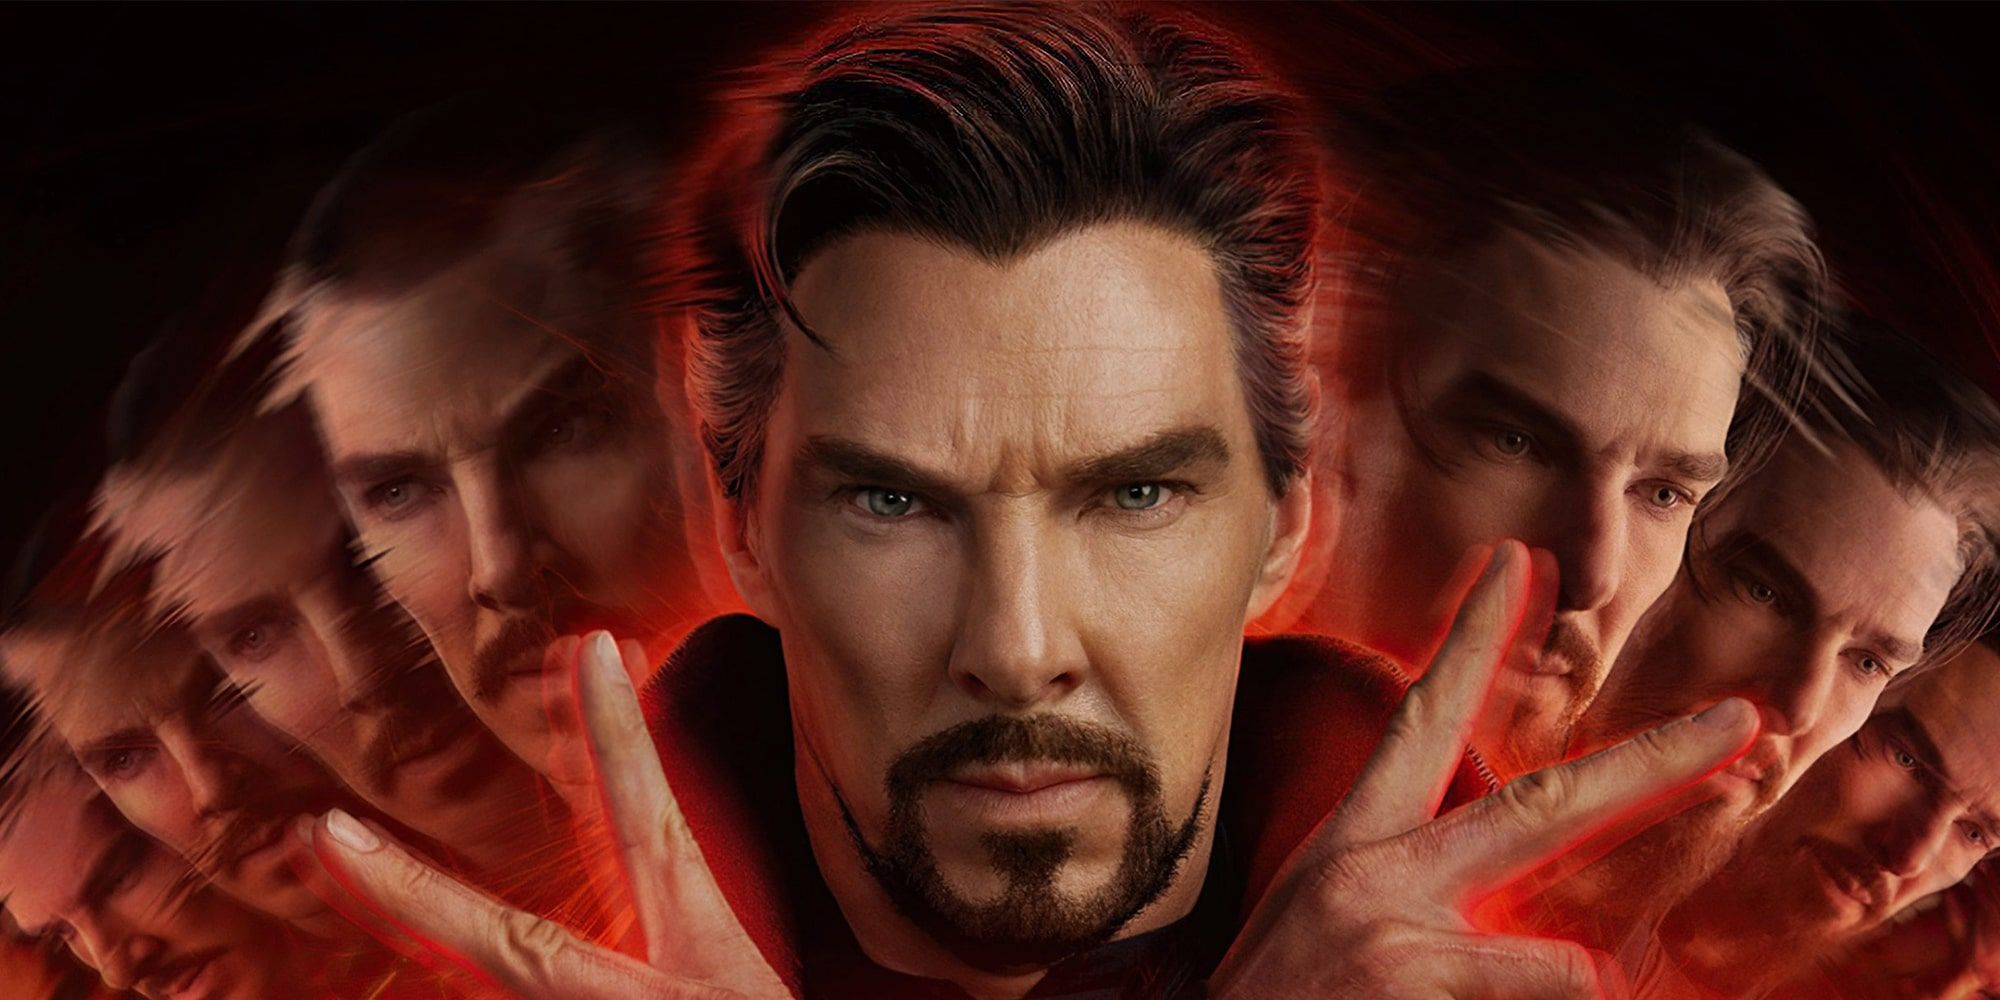 Variants of Doctor Strange in the Multiverse of Madness